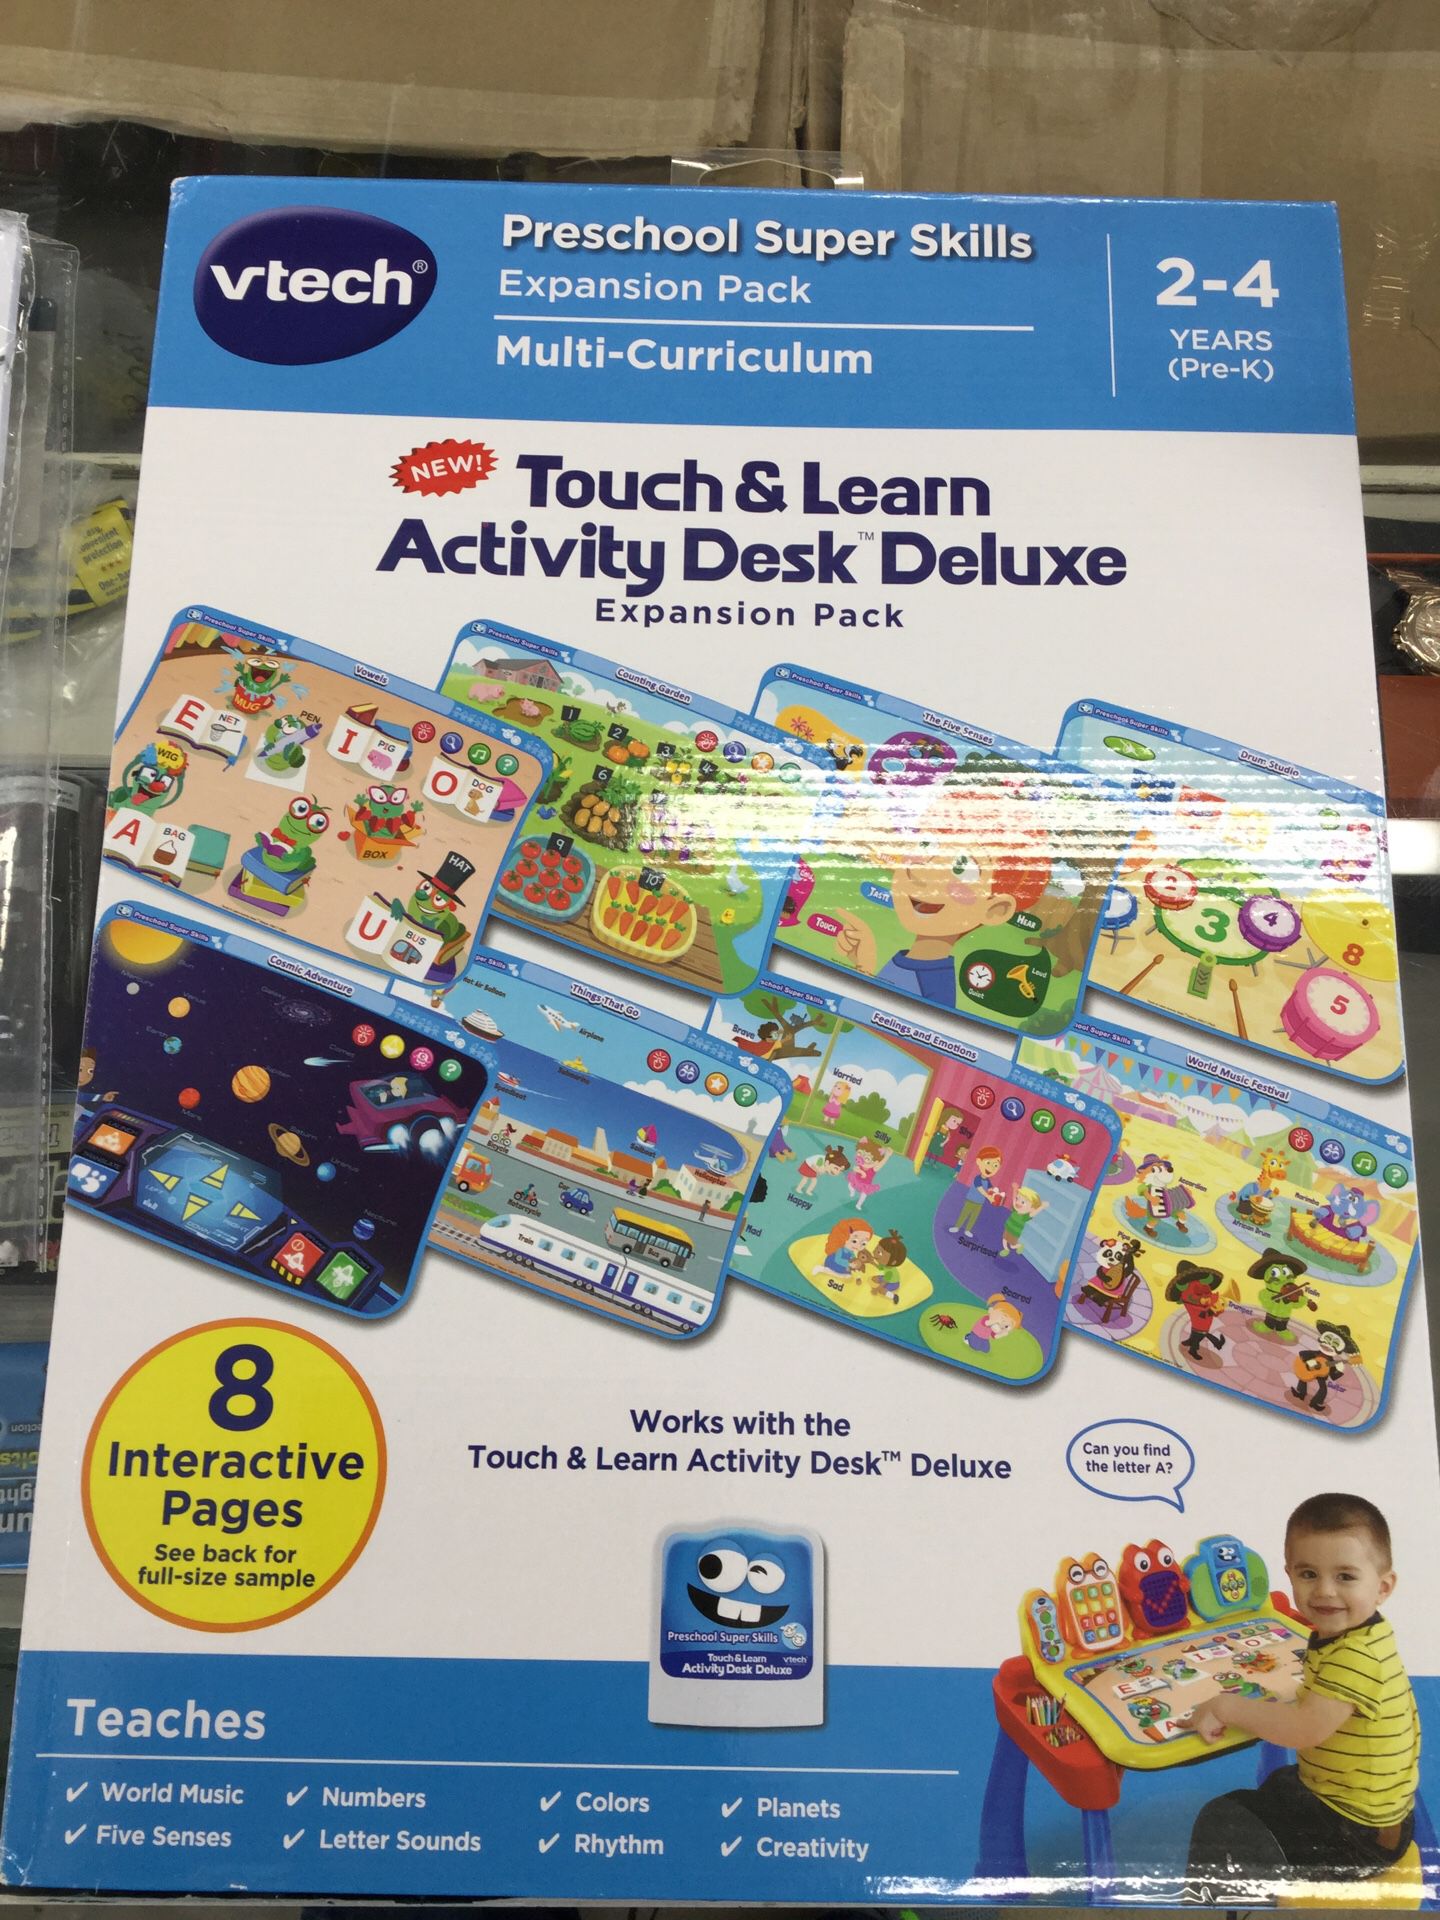 Vtech touch and learn activity desk deluxe expansion pack preschool ages 2-4